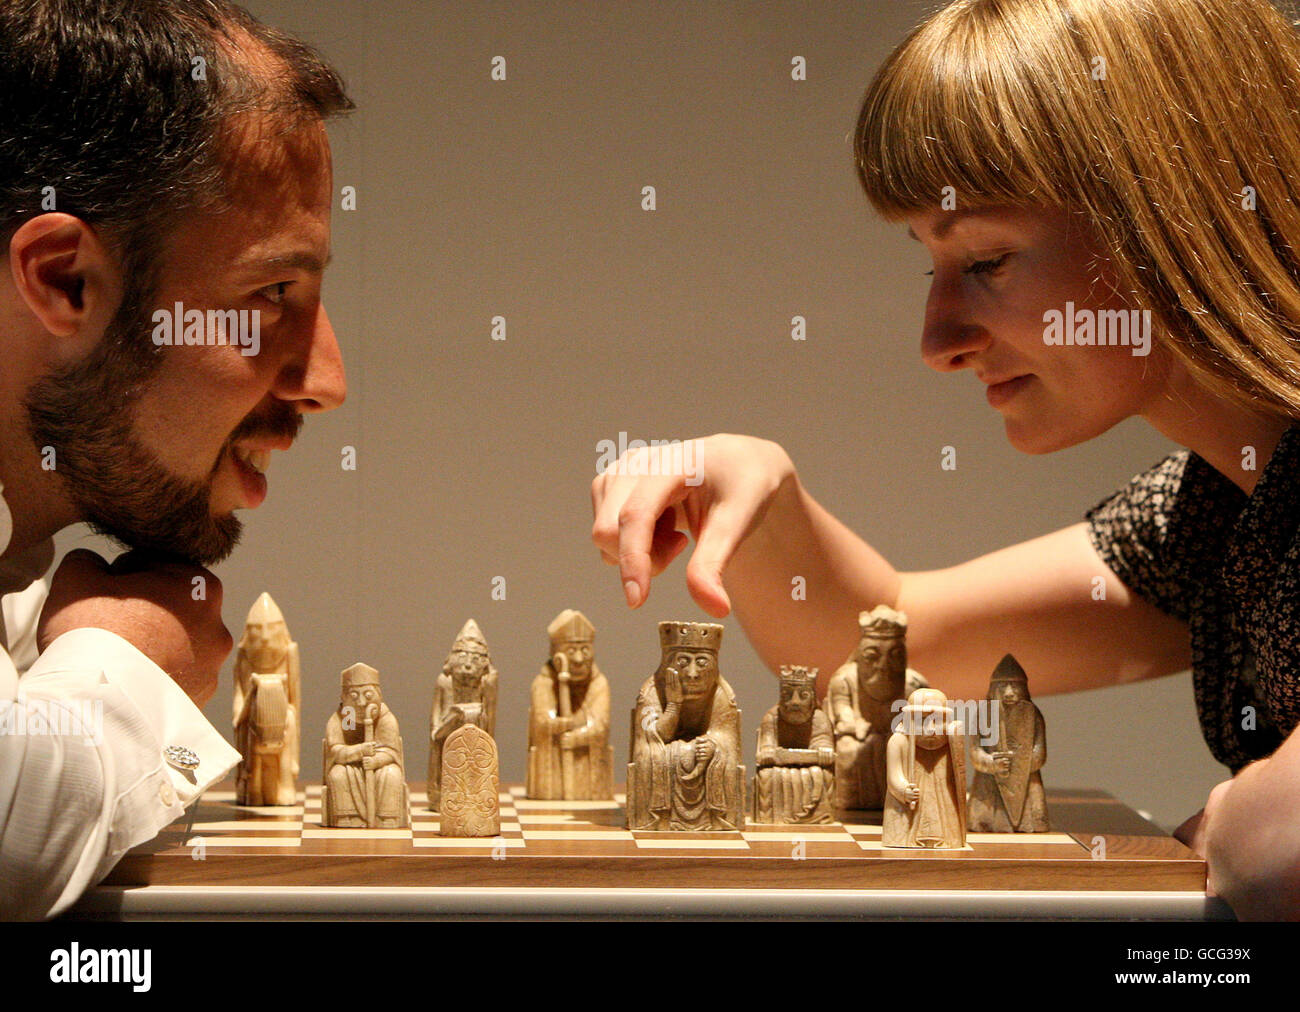 Assistant Curator for Scottish History at the National Museums Scotland, Lyndsay McGill, with Head of London and National Programmes at the British Museum, John Orna-Ornstein, with the Lewis Chessmen chess set at the National Museum of Scotland in Edinburgh. Stock Photo